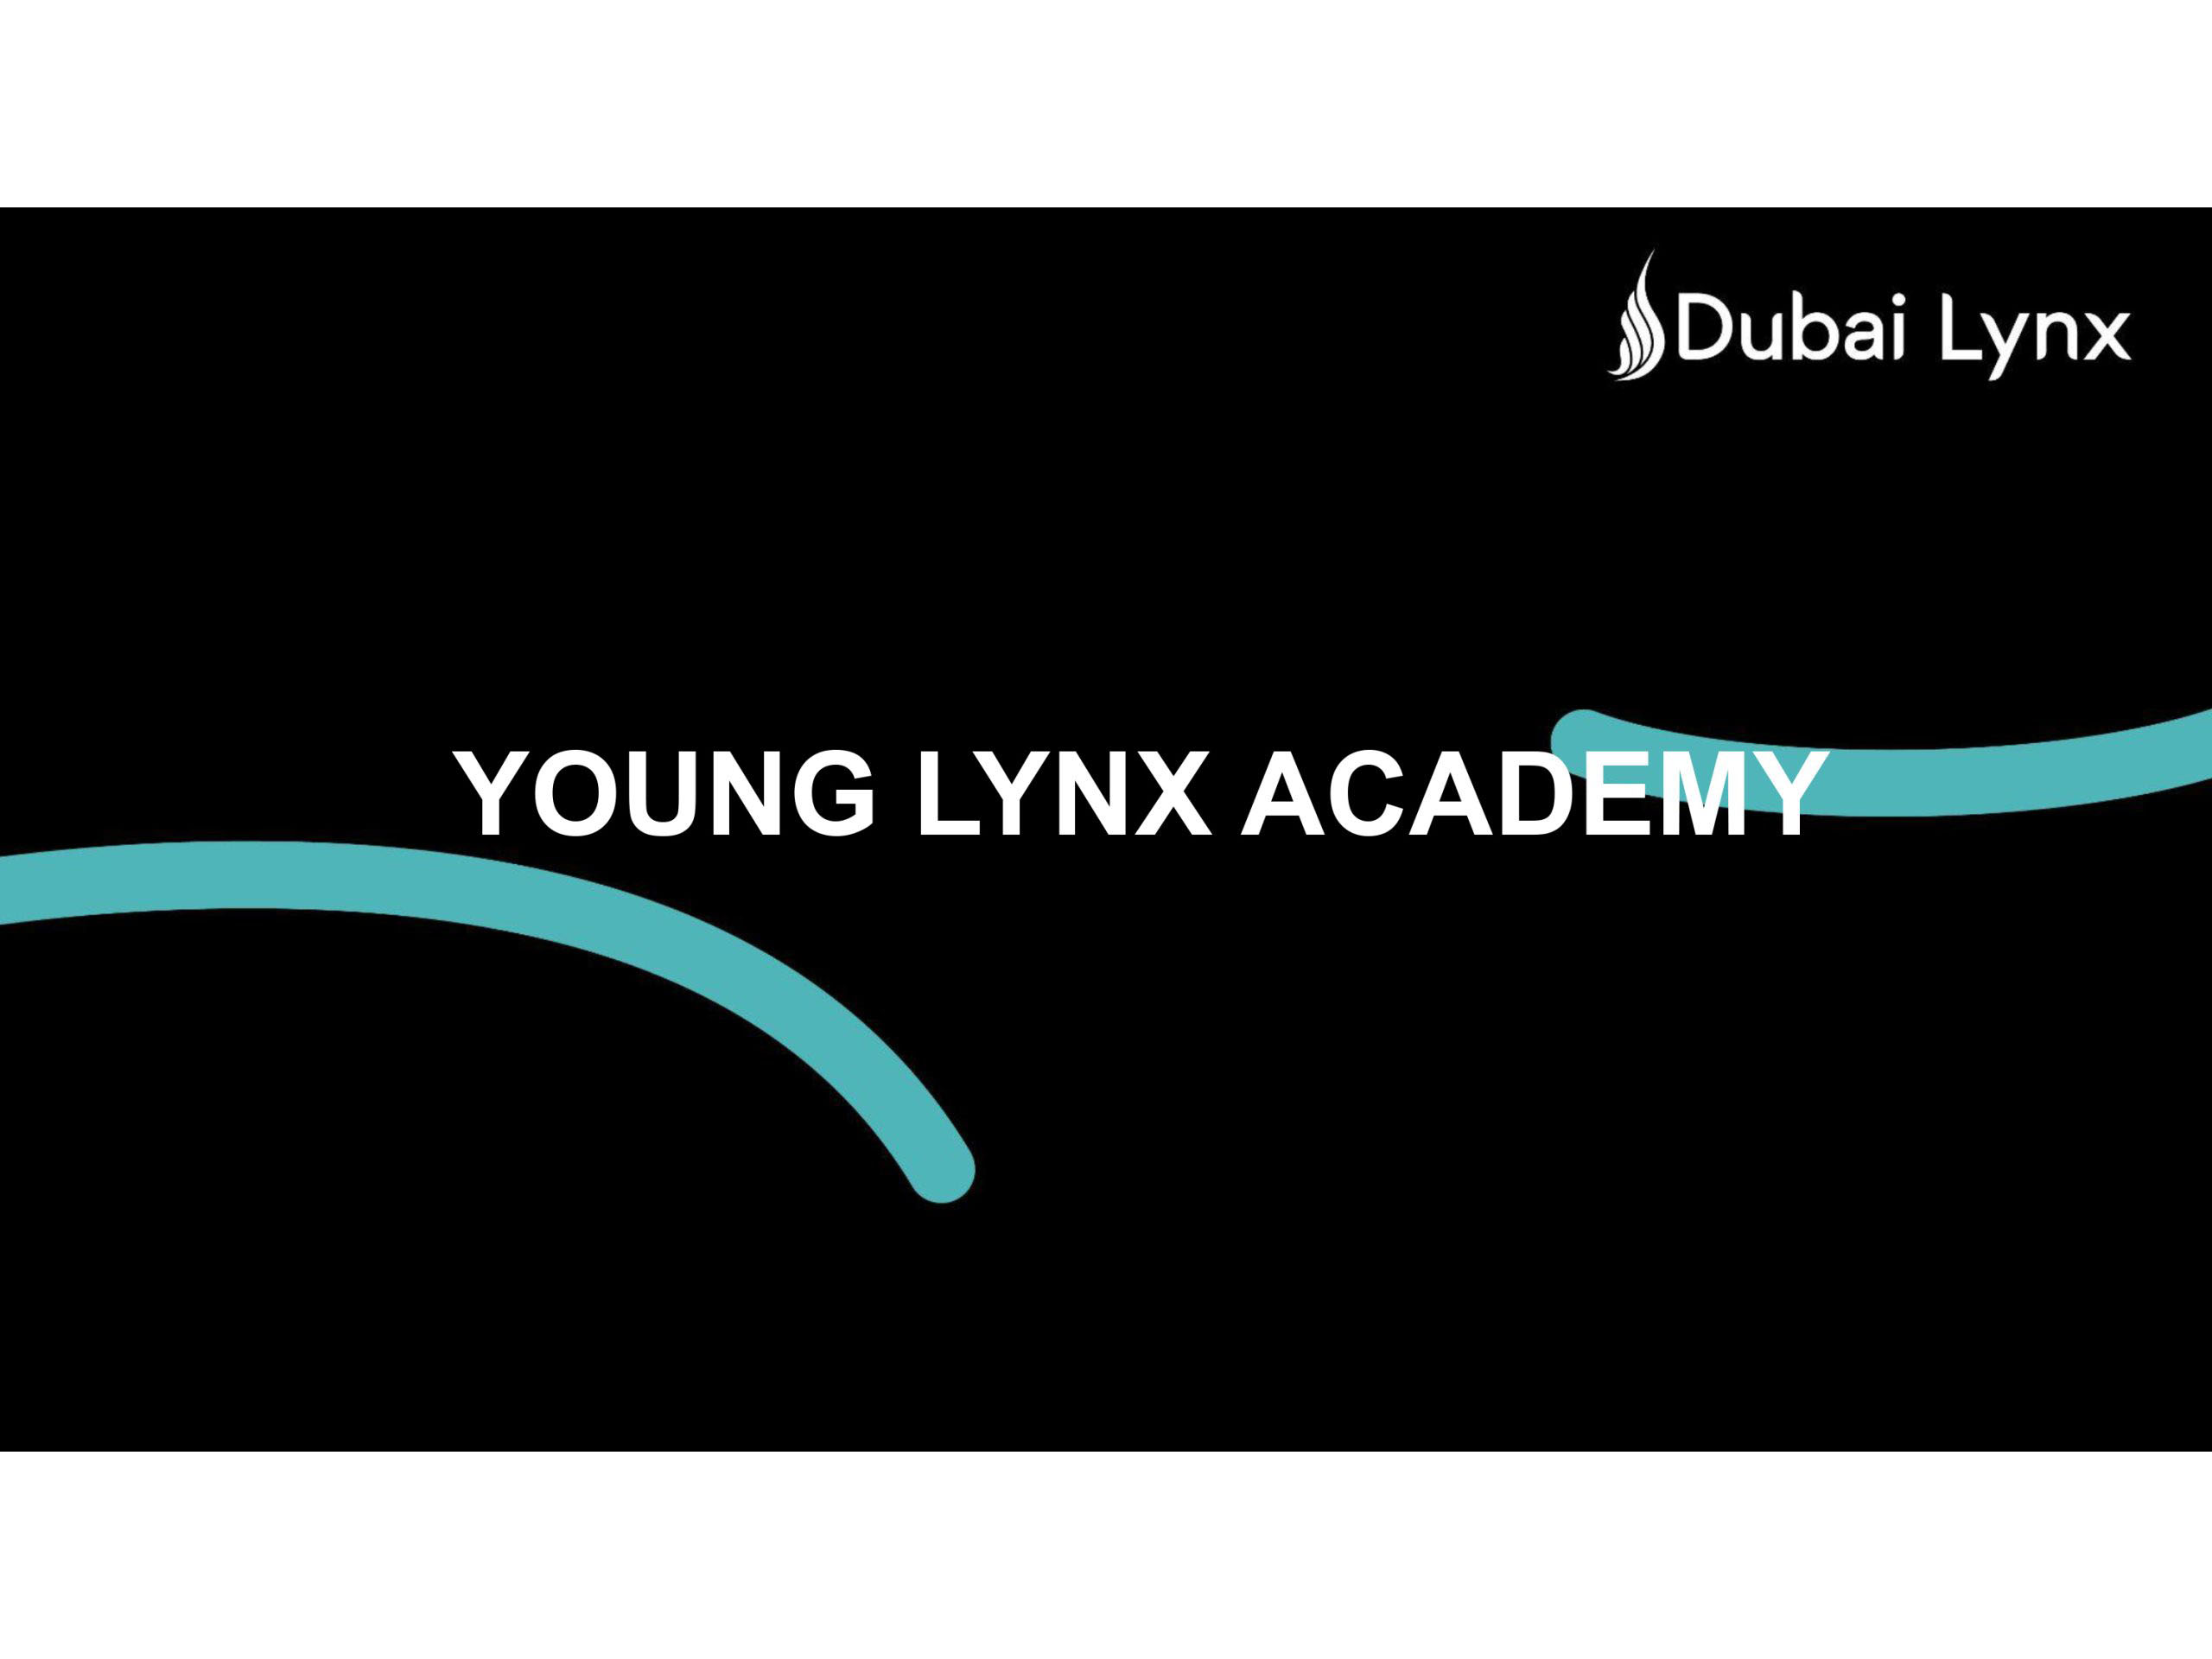 Dubai Lynx partners with Publicis Groupe to host the  Young Lynx Academy 